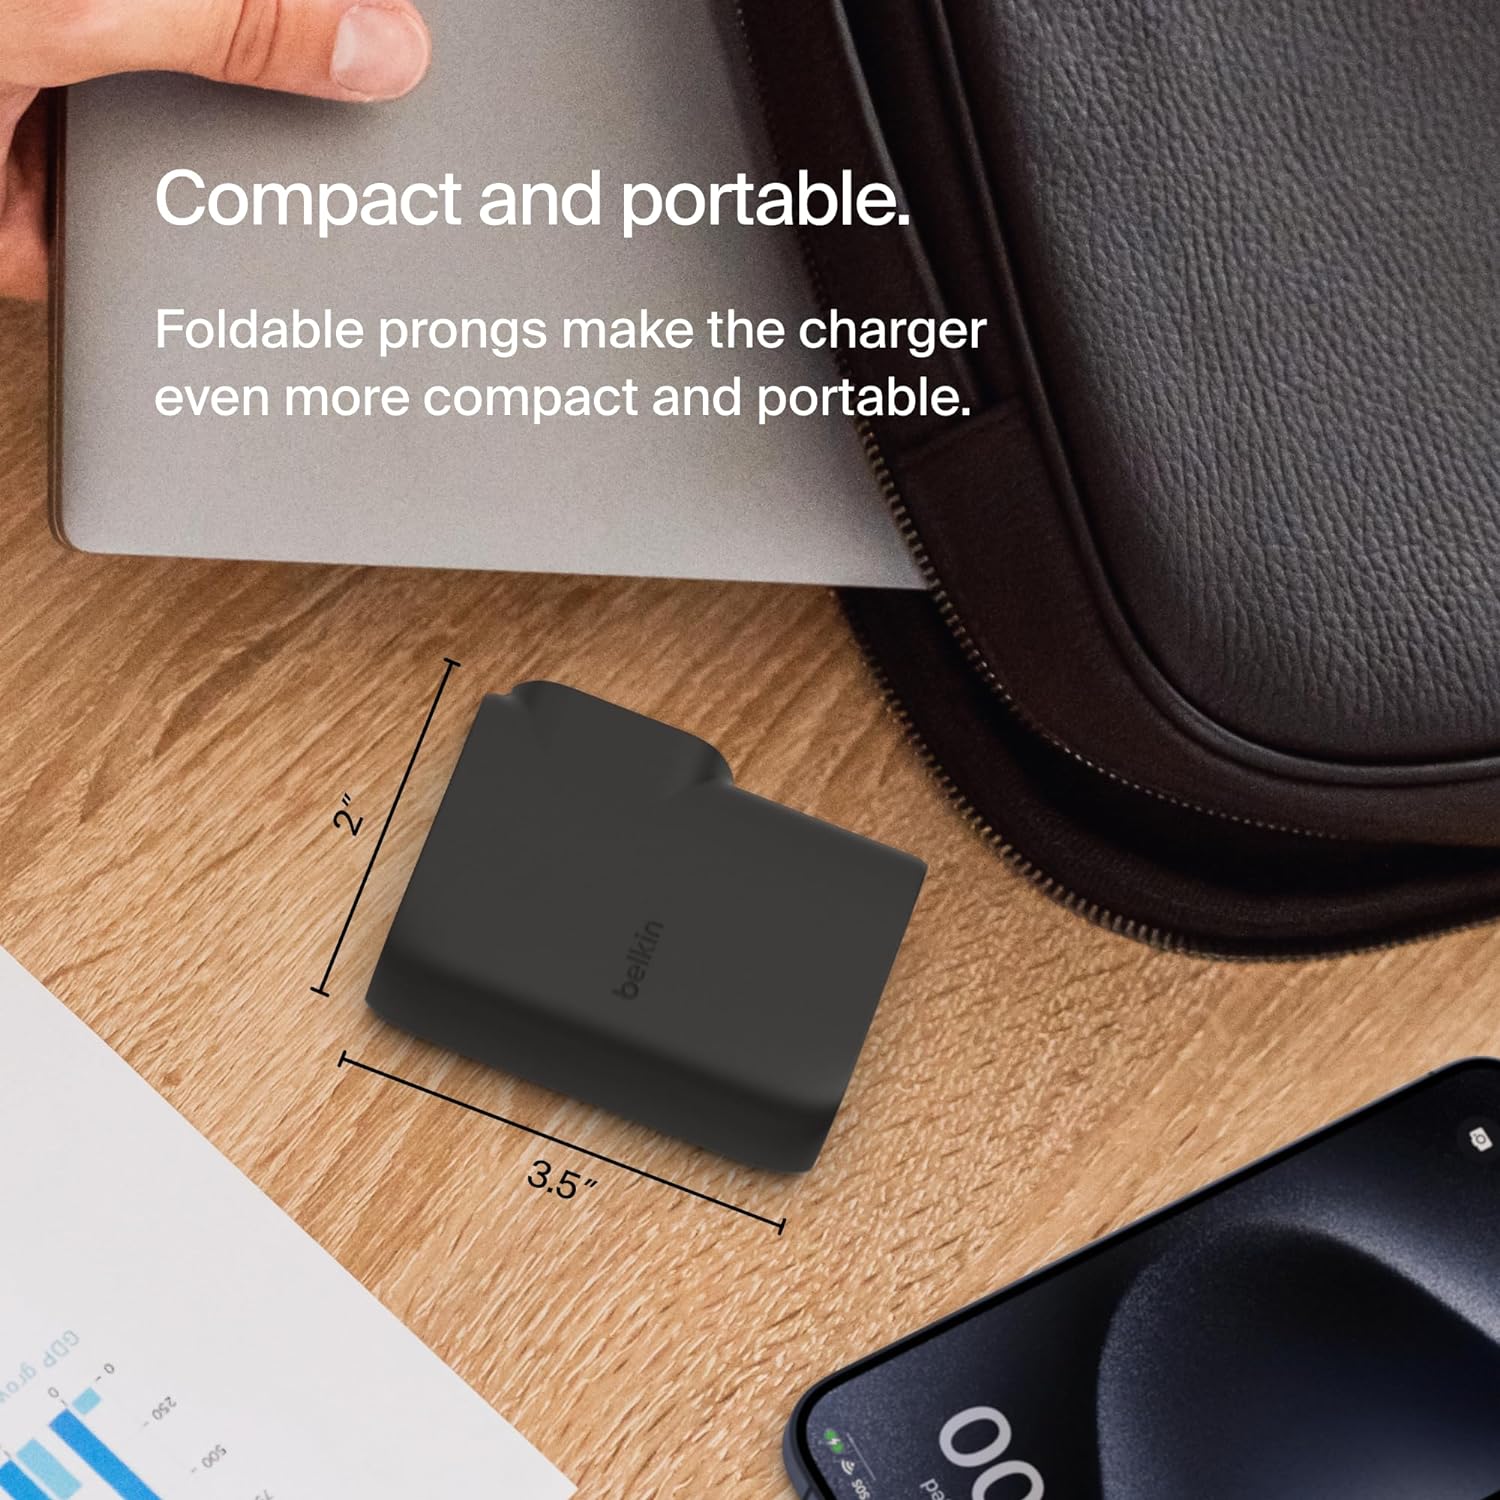 Belkin BoostCharge Hybrid Wall Charger 25W + Power Bank 5K, 2-in-1 Portable Charger, Portable Battery Charger w/USB-C Port & USB-A Port - Travel-Friendly, Dual-Port Charging Device - Black